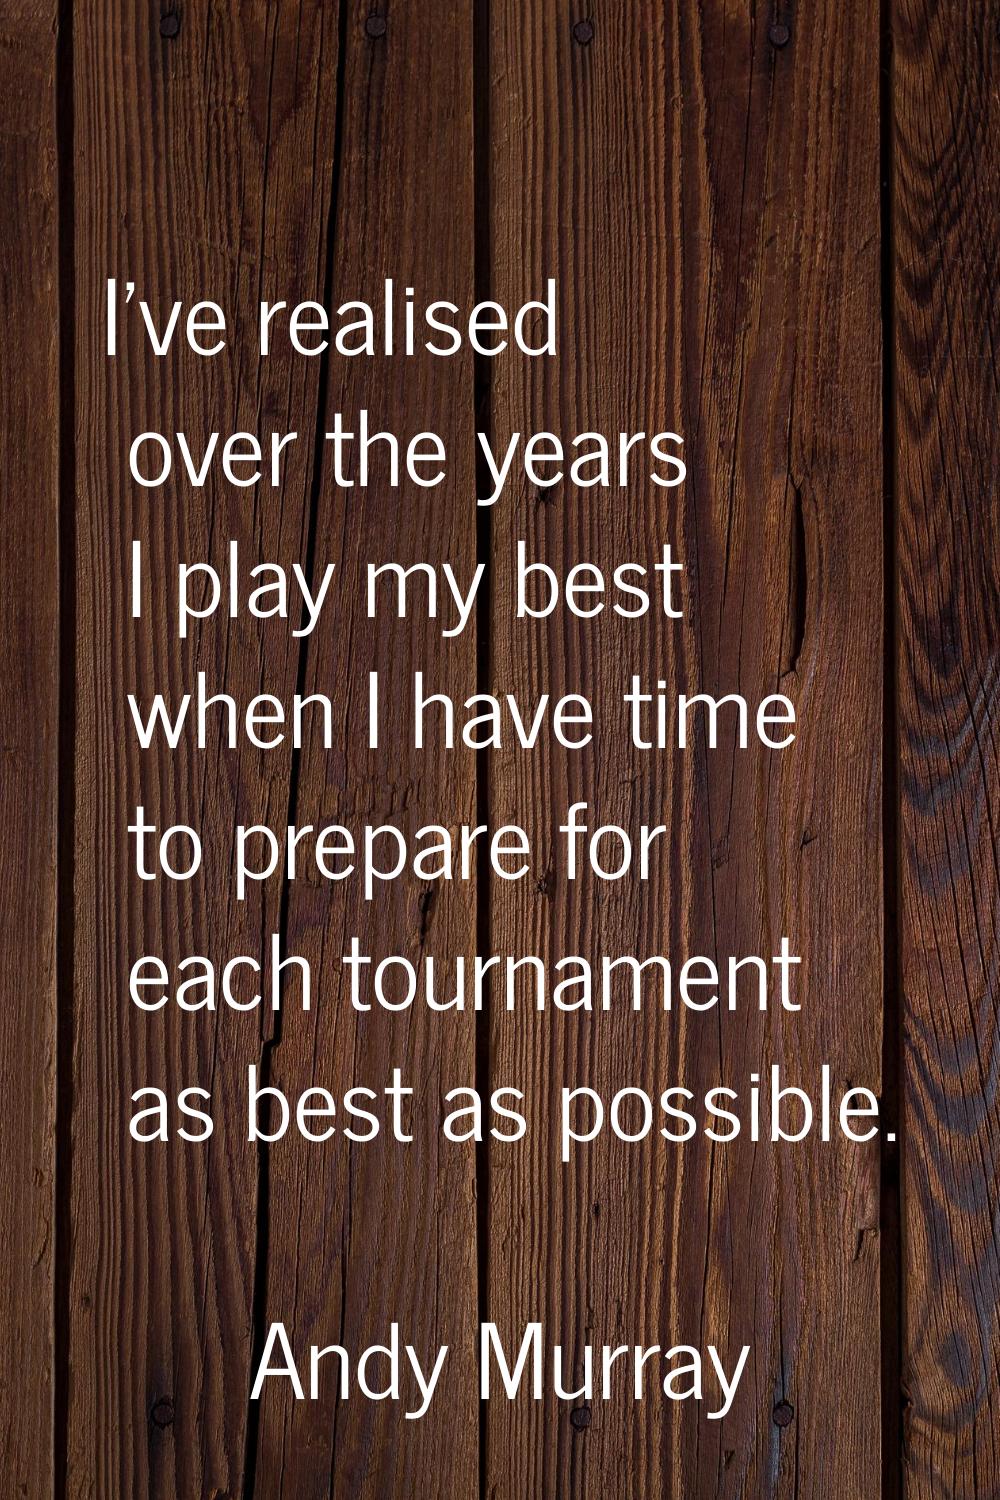 I've realised over the years I play my best when I have time to prepare for each tournament as best